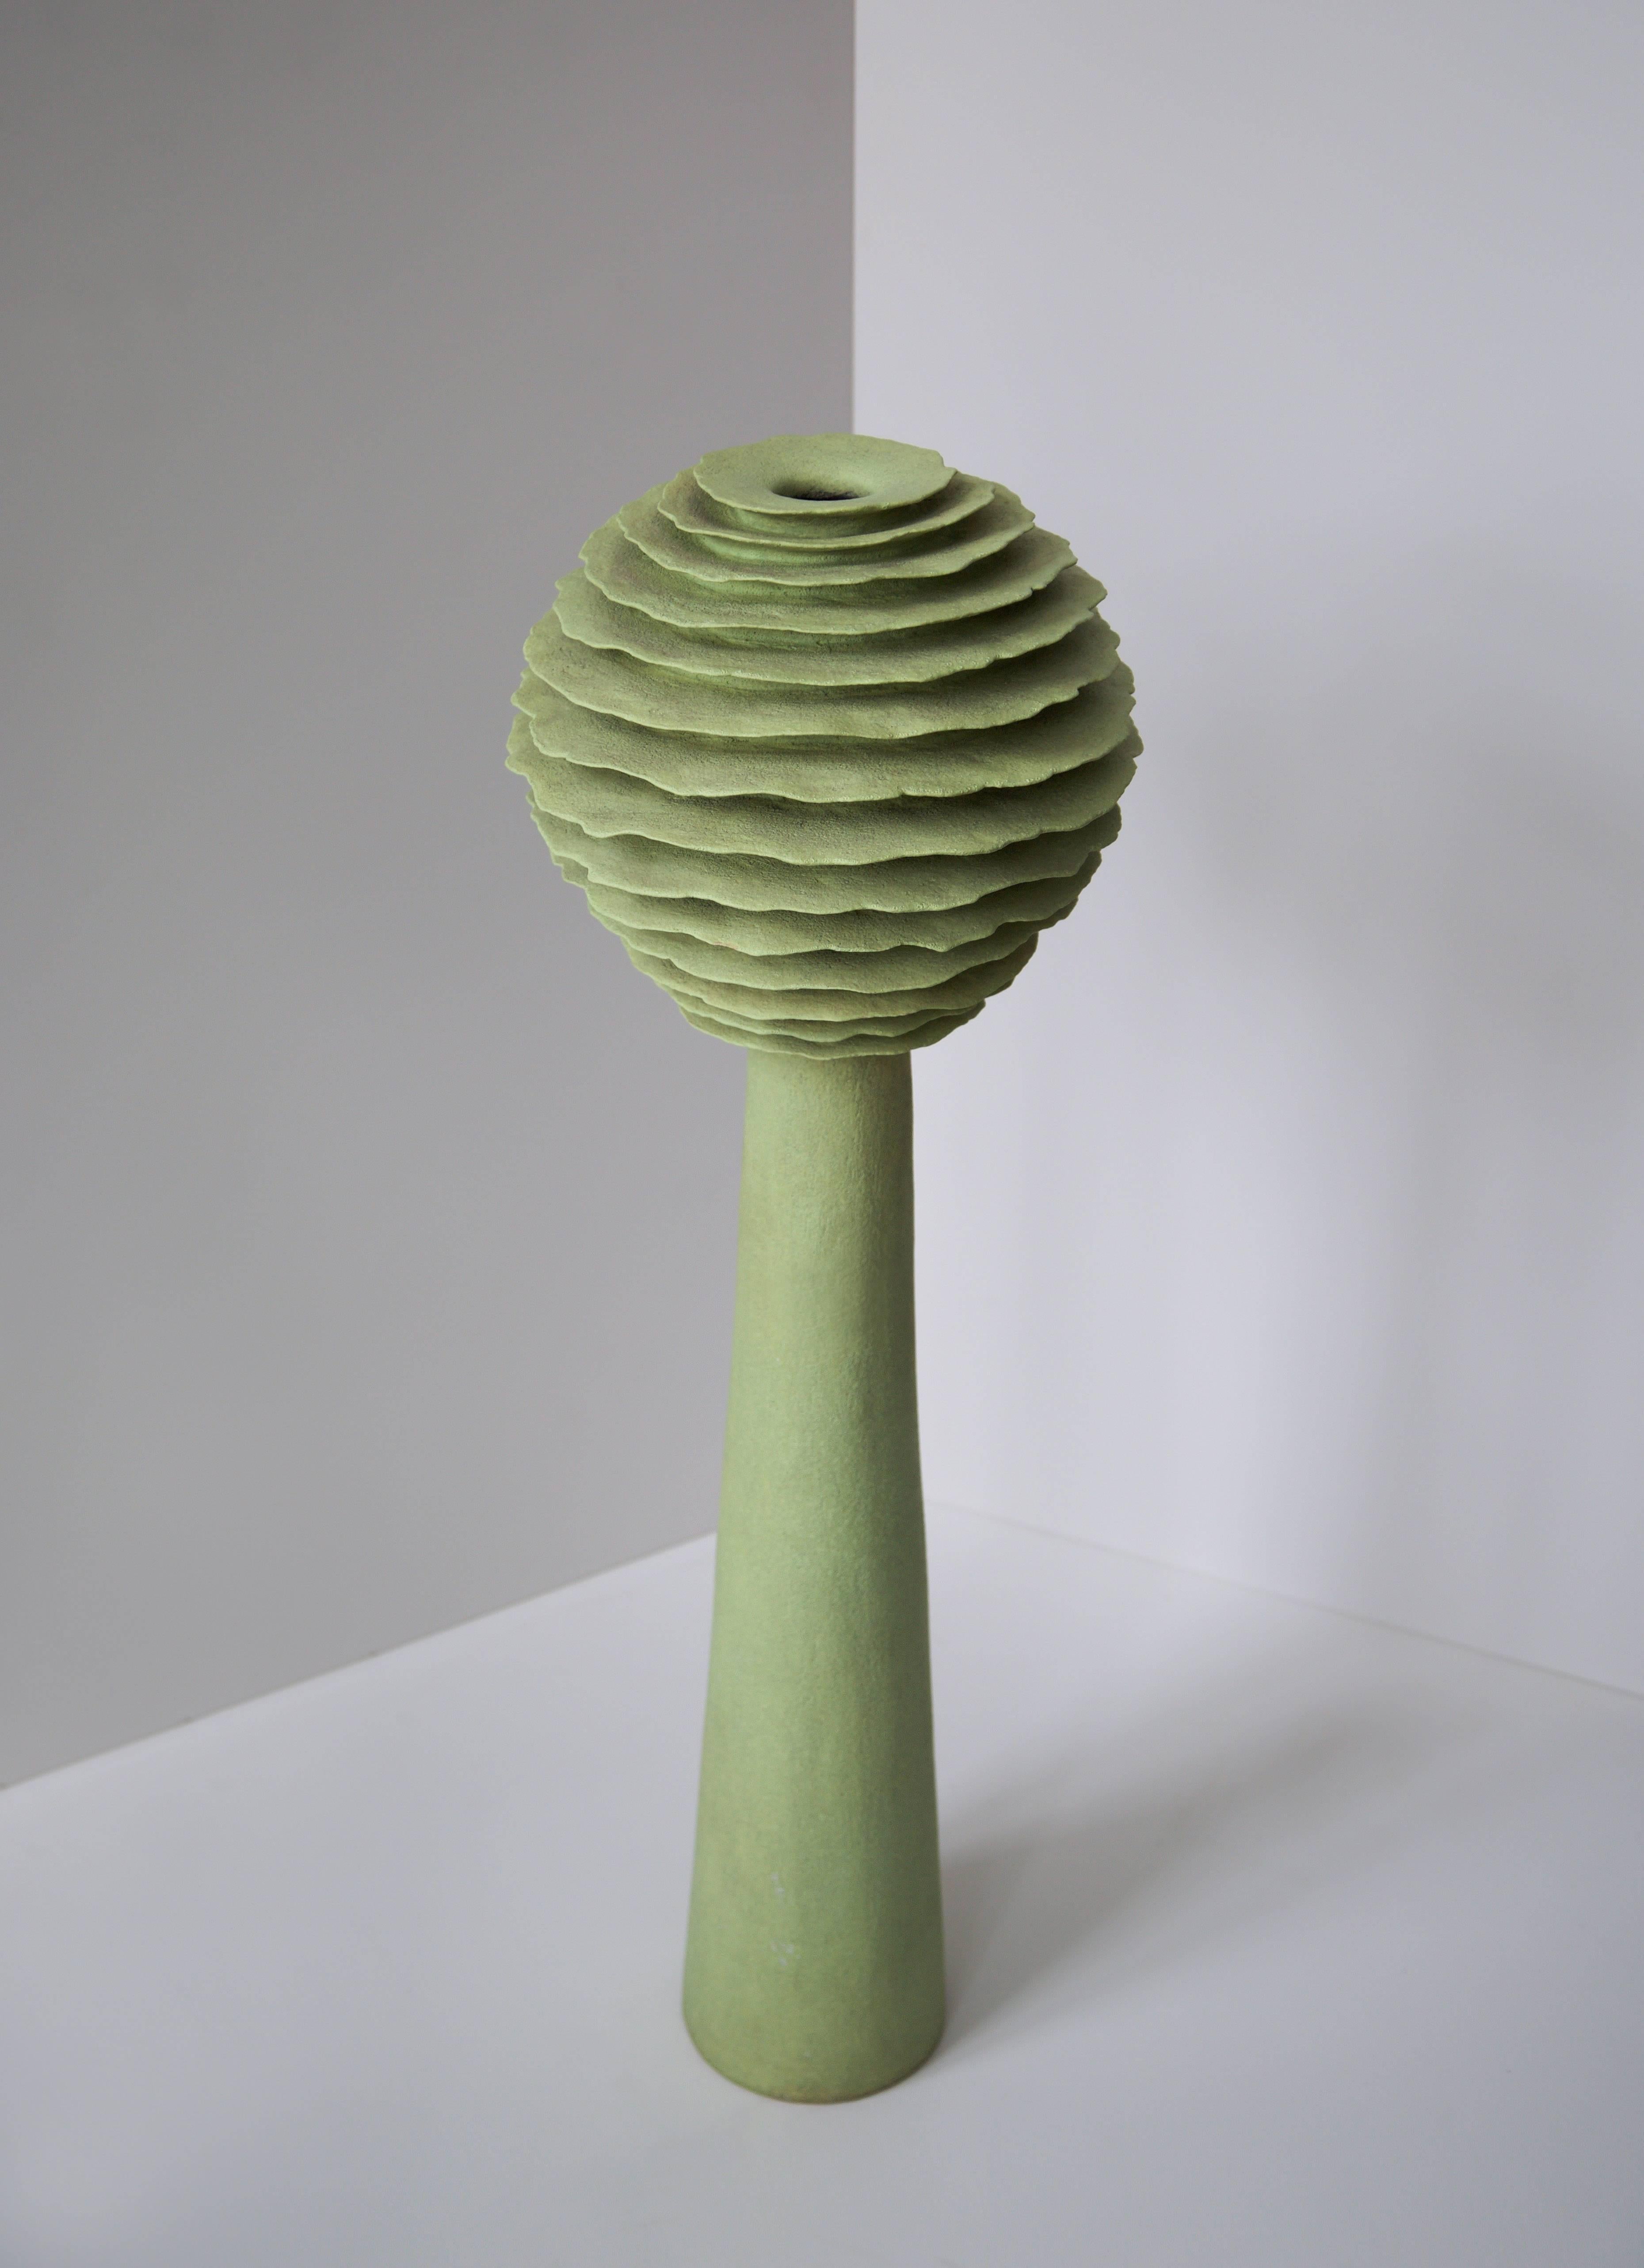 Large stoneware sculpture by Italian/Danish contemporary ceramist Sandra Davolio (1951 - ) 

Denmark, circa 2010. 

Measures: 91 x 30.5 cm. 

Handmade to order, one of a kind.
Stoneware light green matte glaze. 

Letter of authenticity from